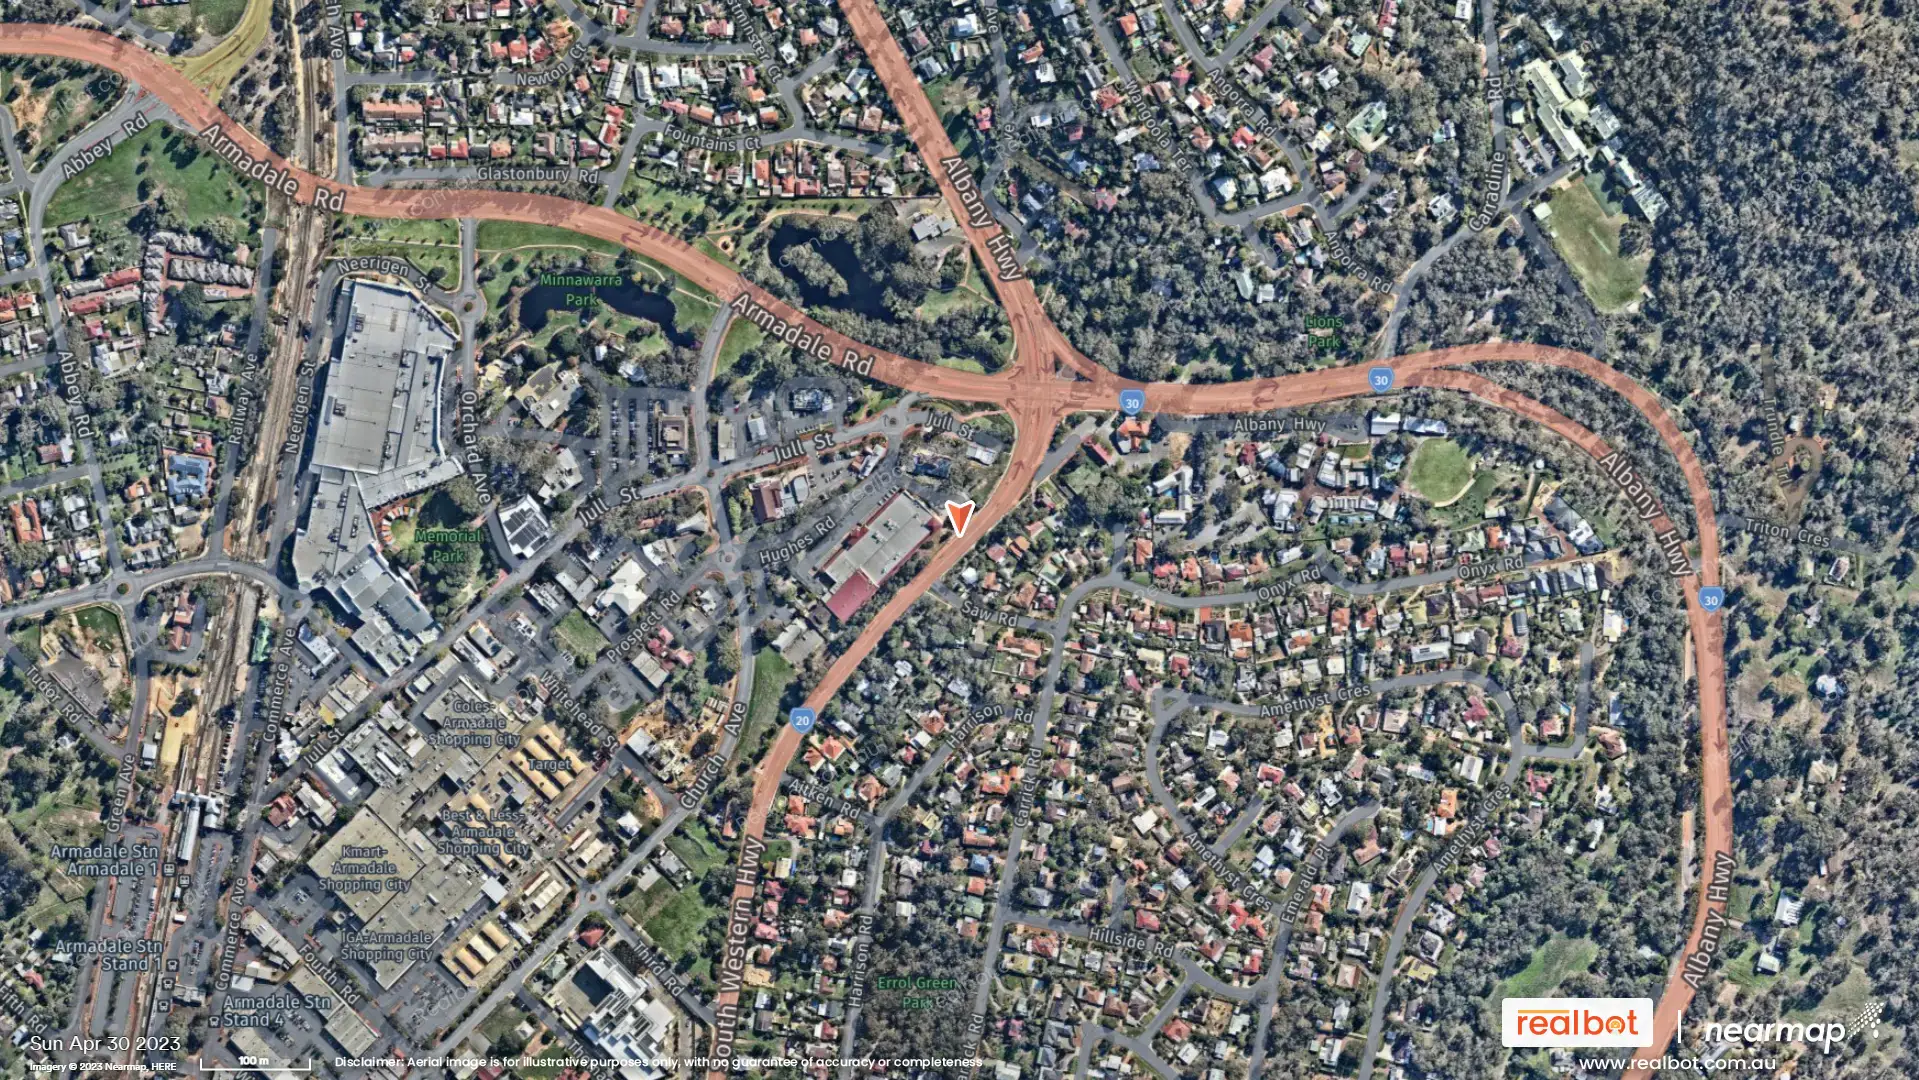 armadale-wa-6112-Suburb-Profile-And-Aerial-Images-Real-Search